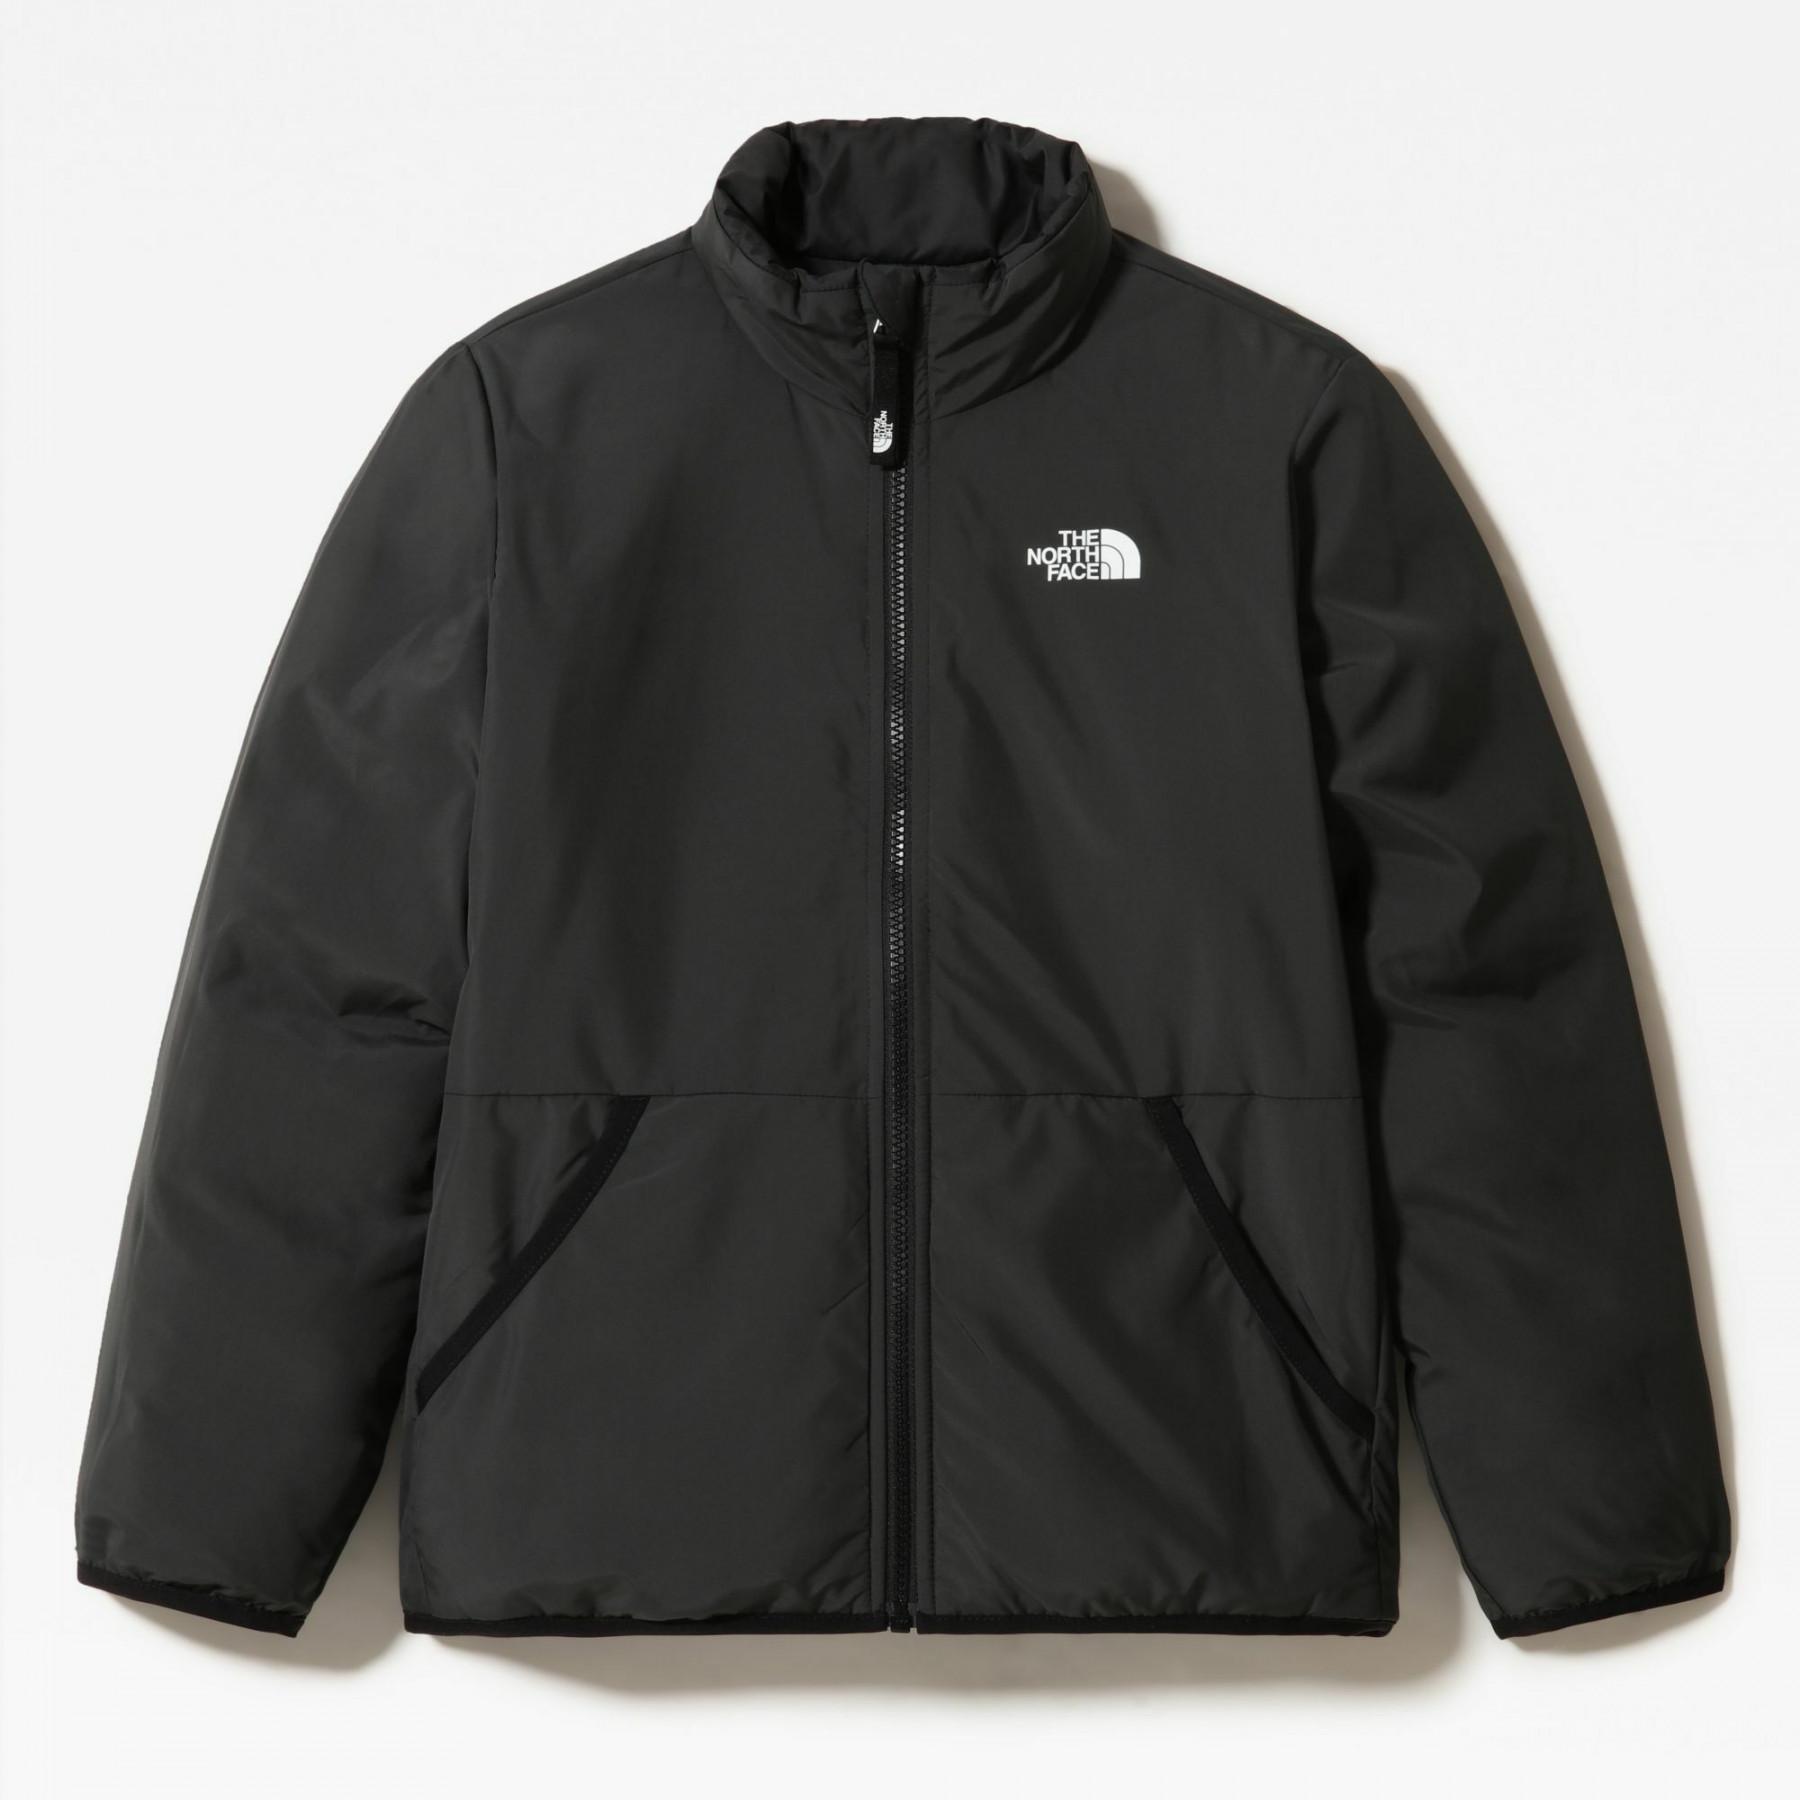 Children's jacket The North Face Reversible Waterproof - Jackets ...